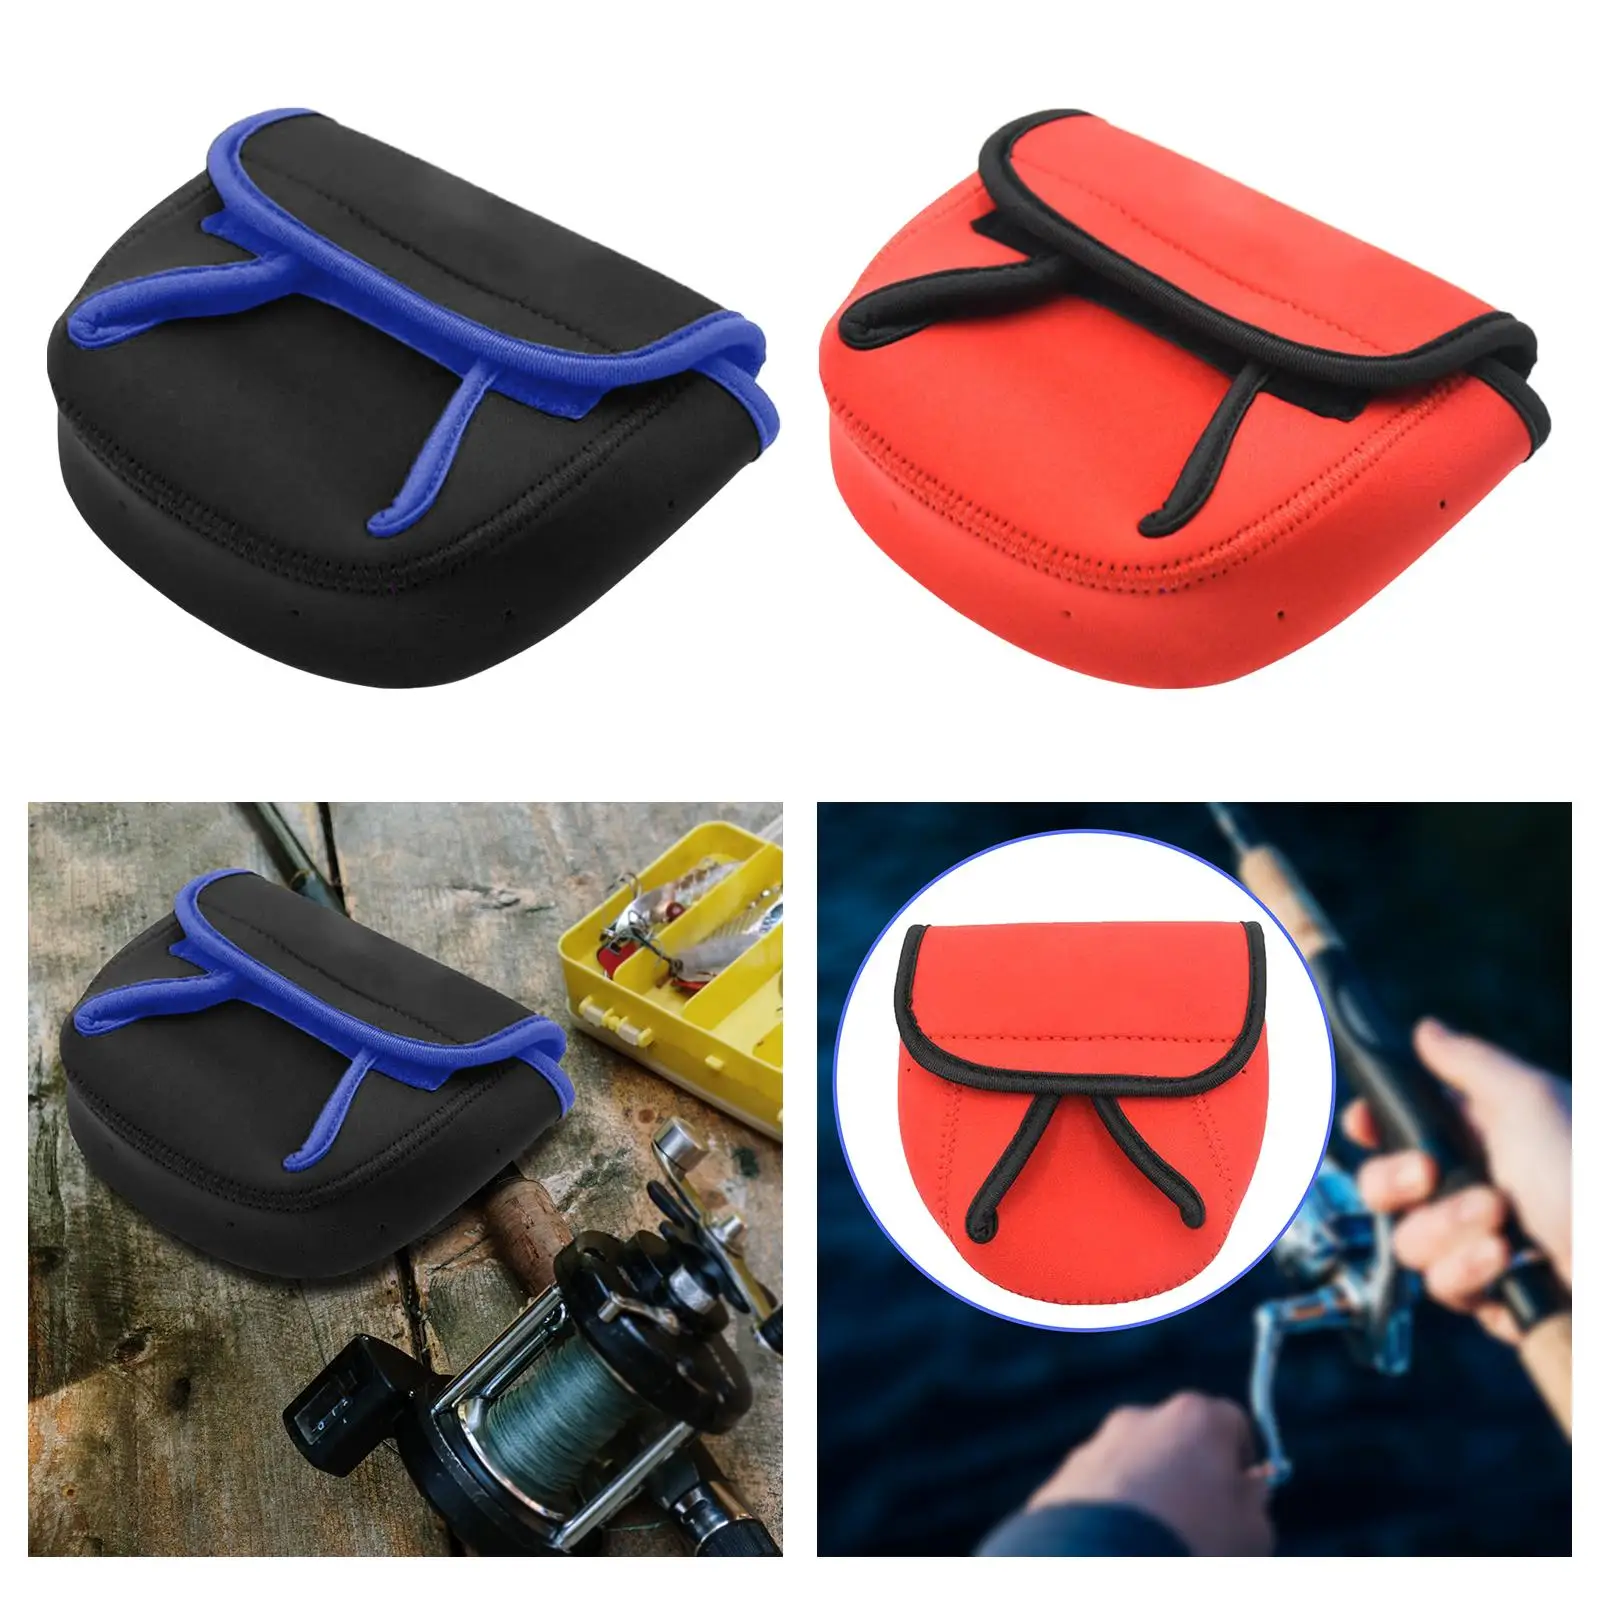 Lightweight Fishing Reel Bag Fishing Bags Fishing Reel Protective Case Neoprene Fishing Reel Protective Case Cover Pouch Bag